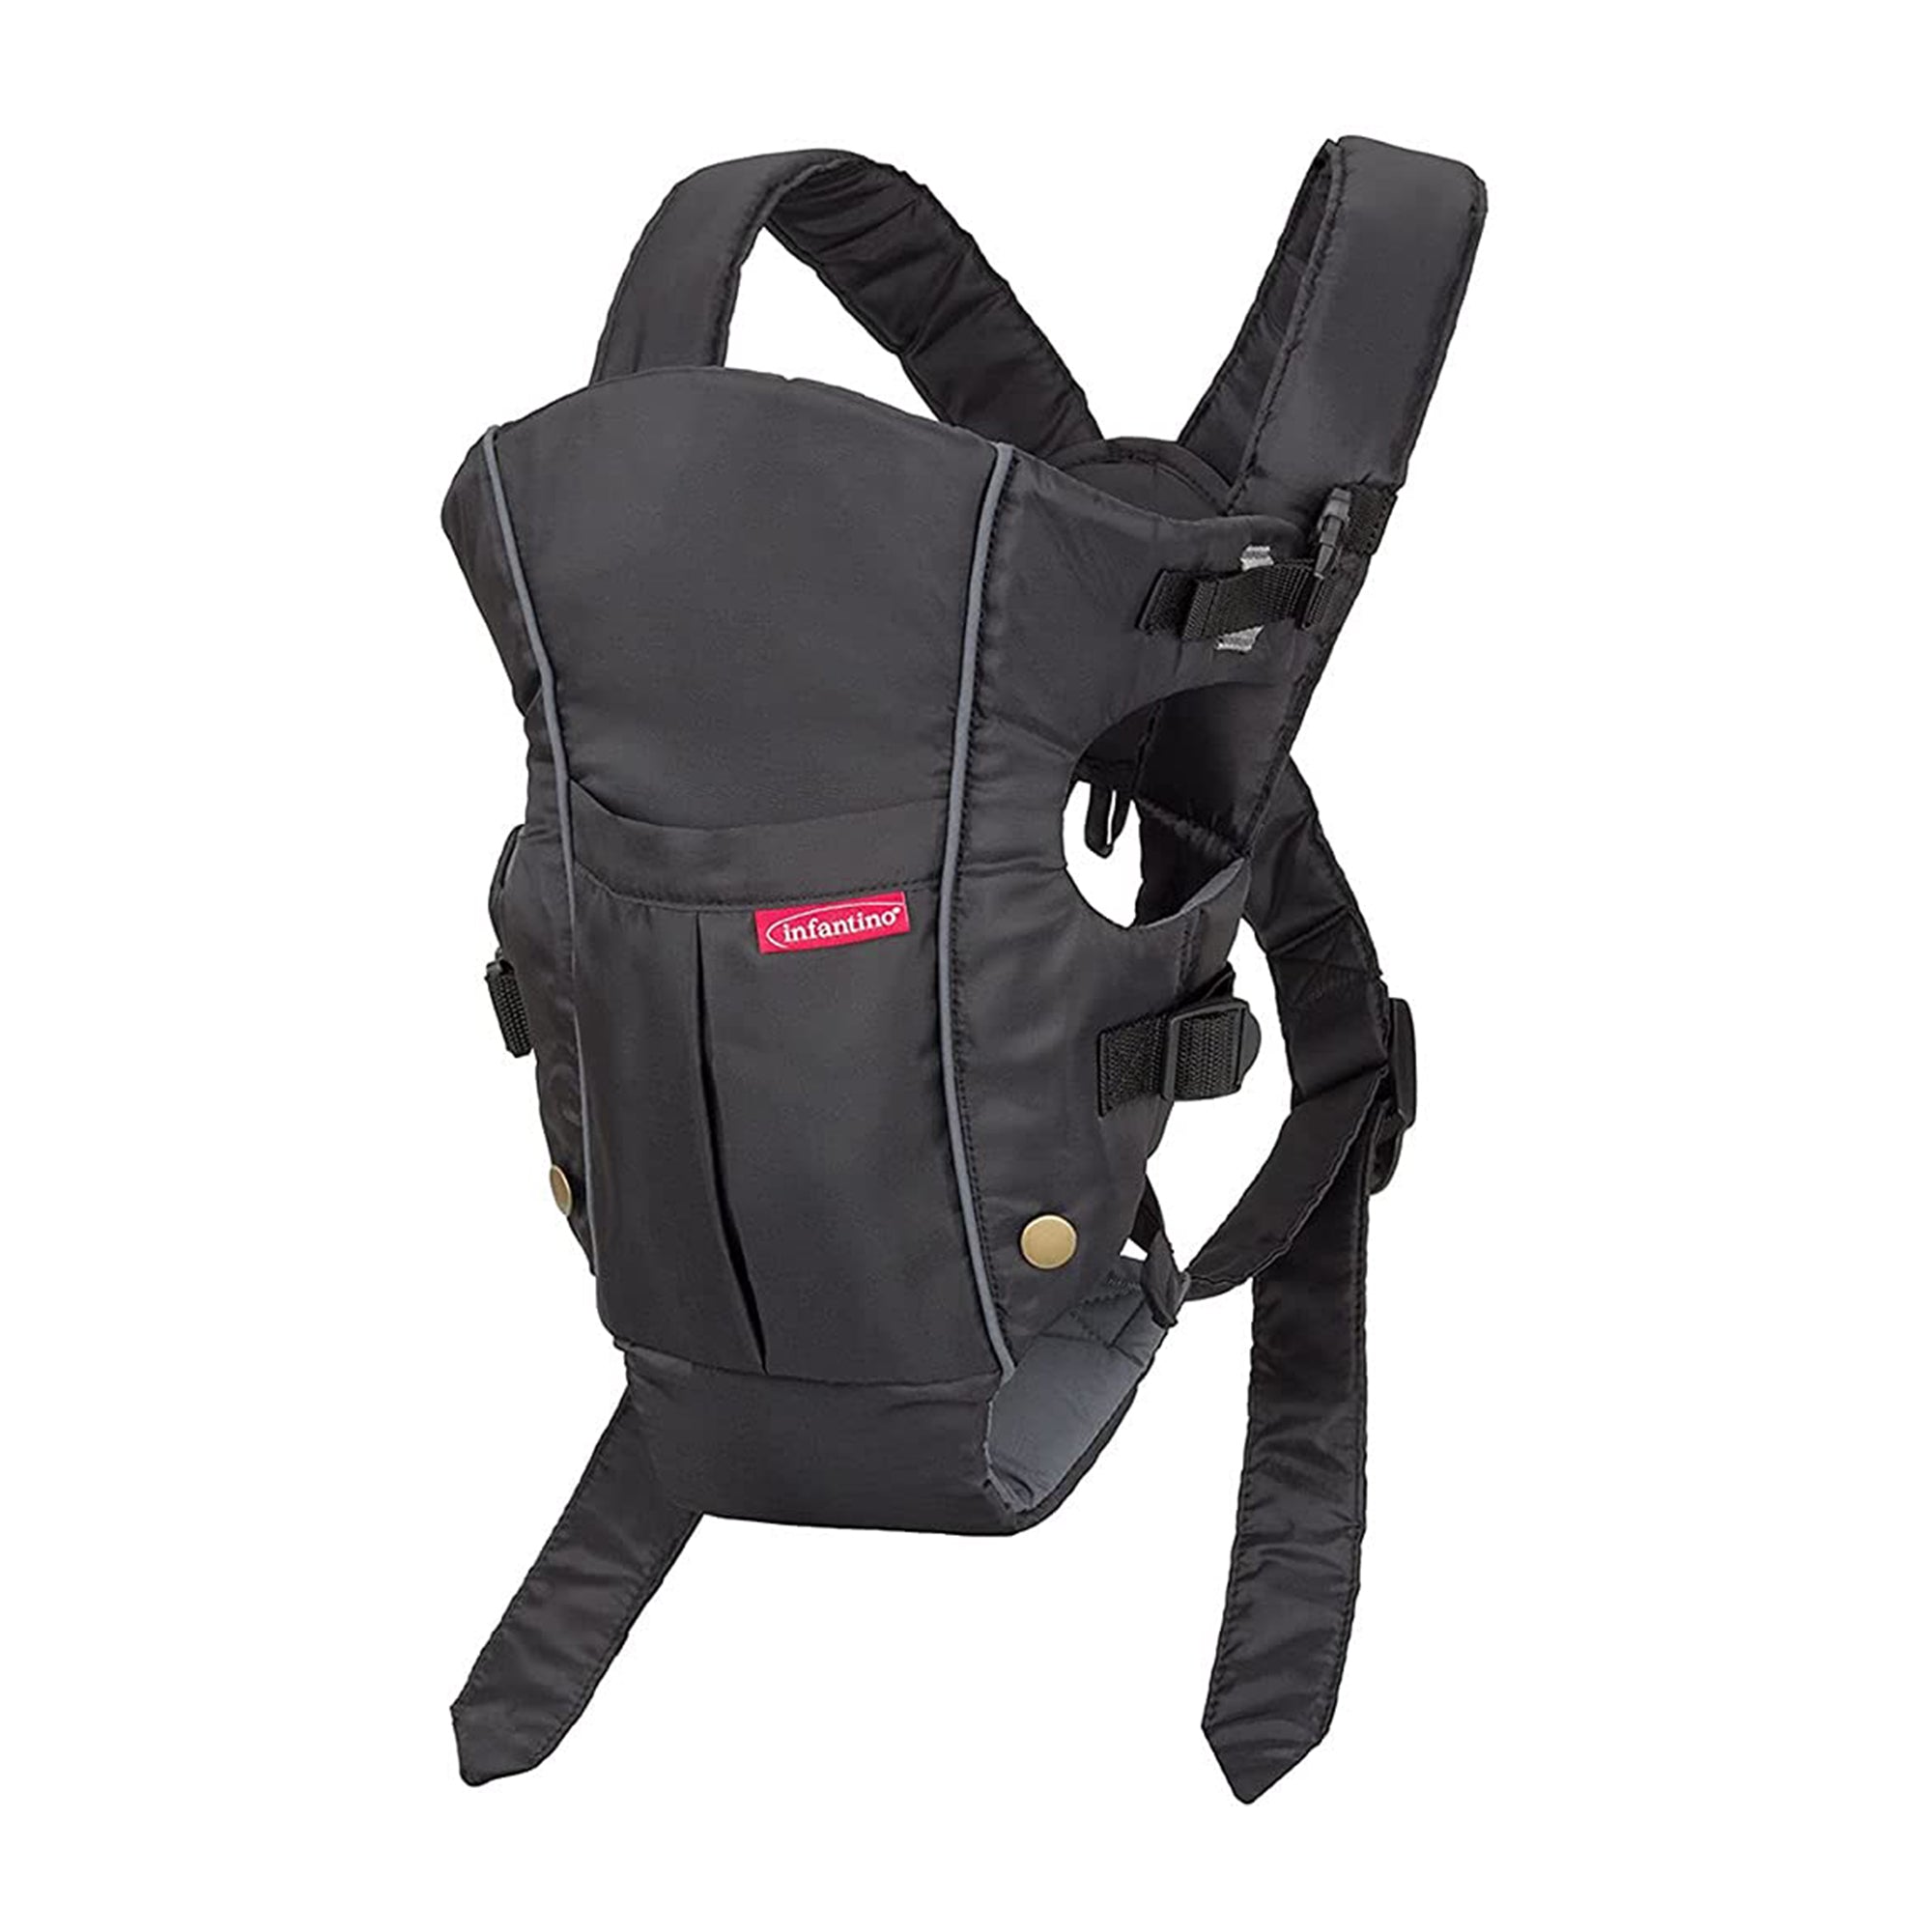 Infantino Swift Classic Carrier - Black - Birth to 12 Months